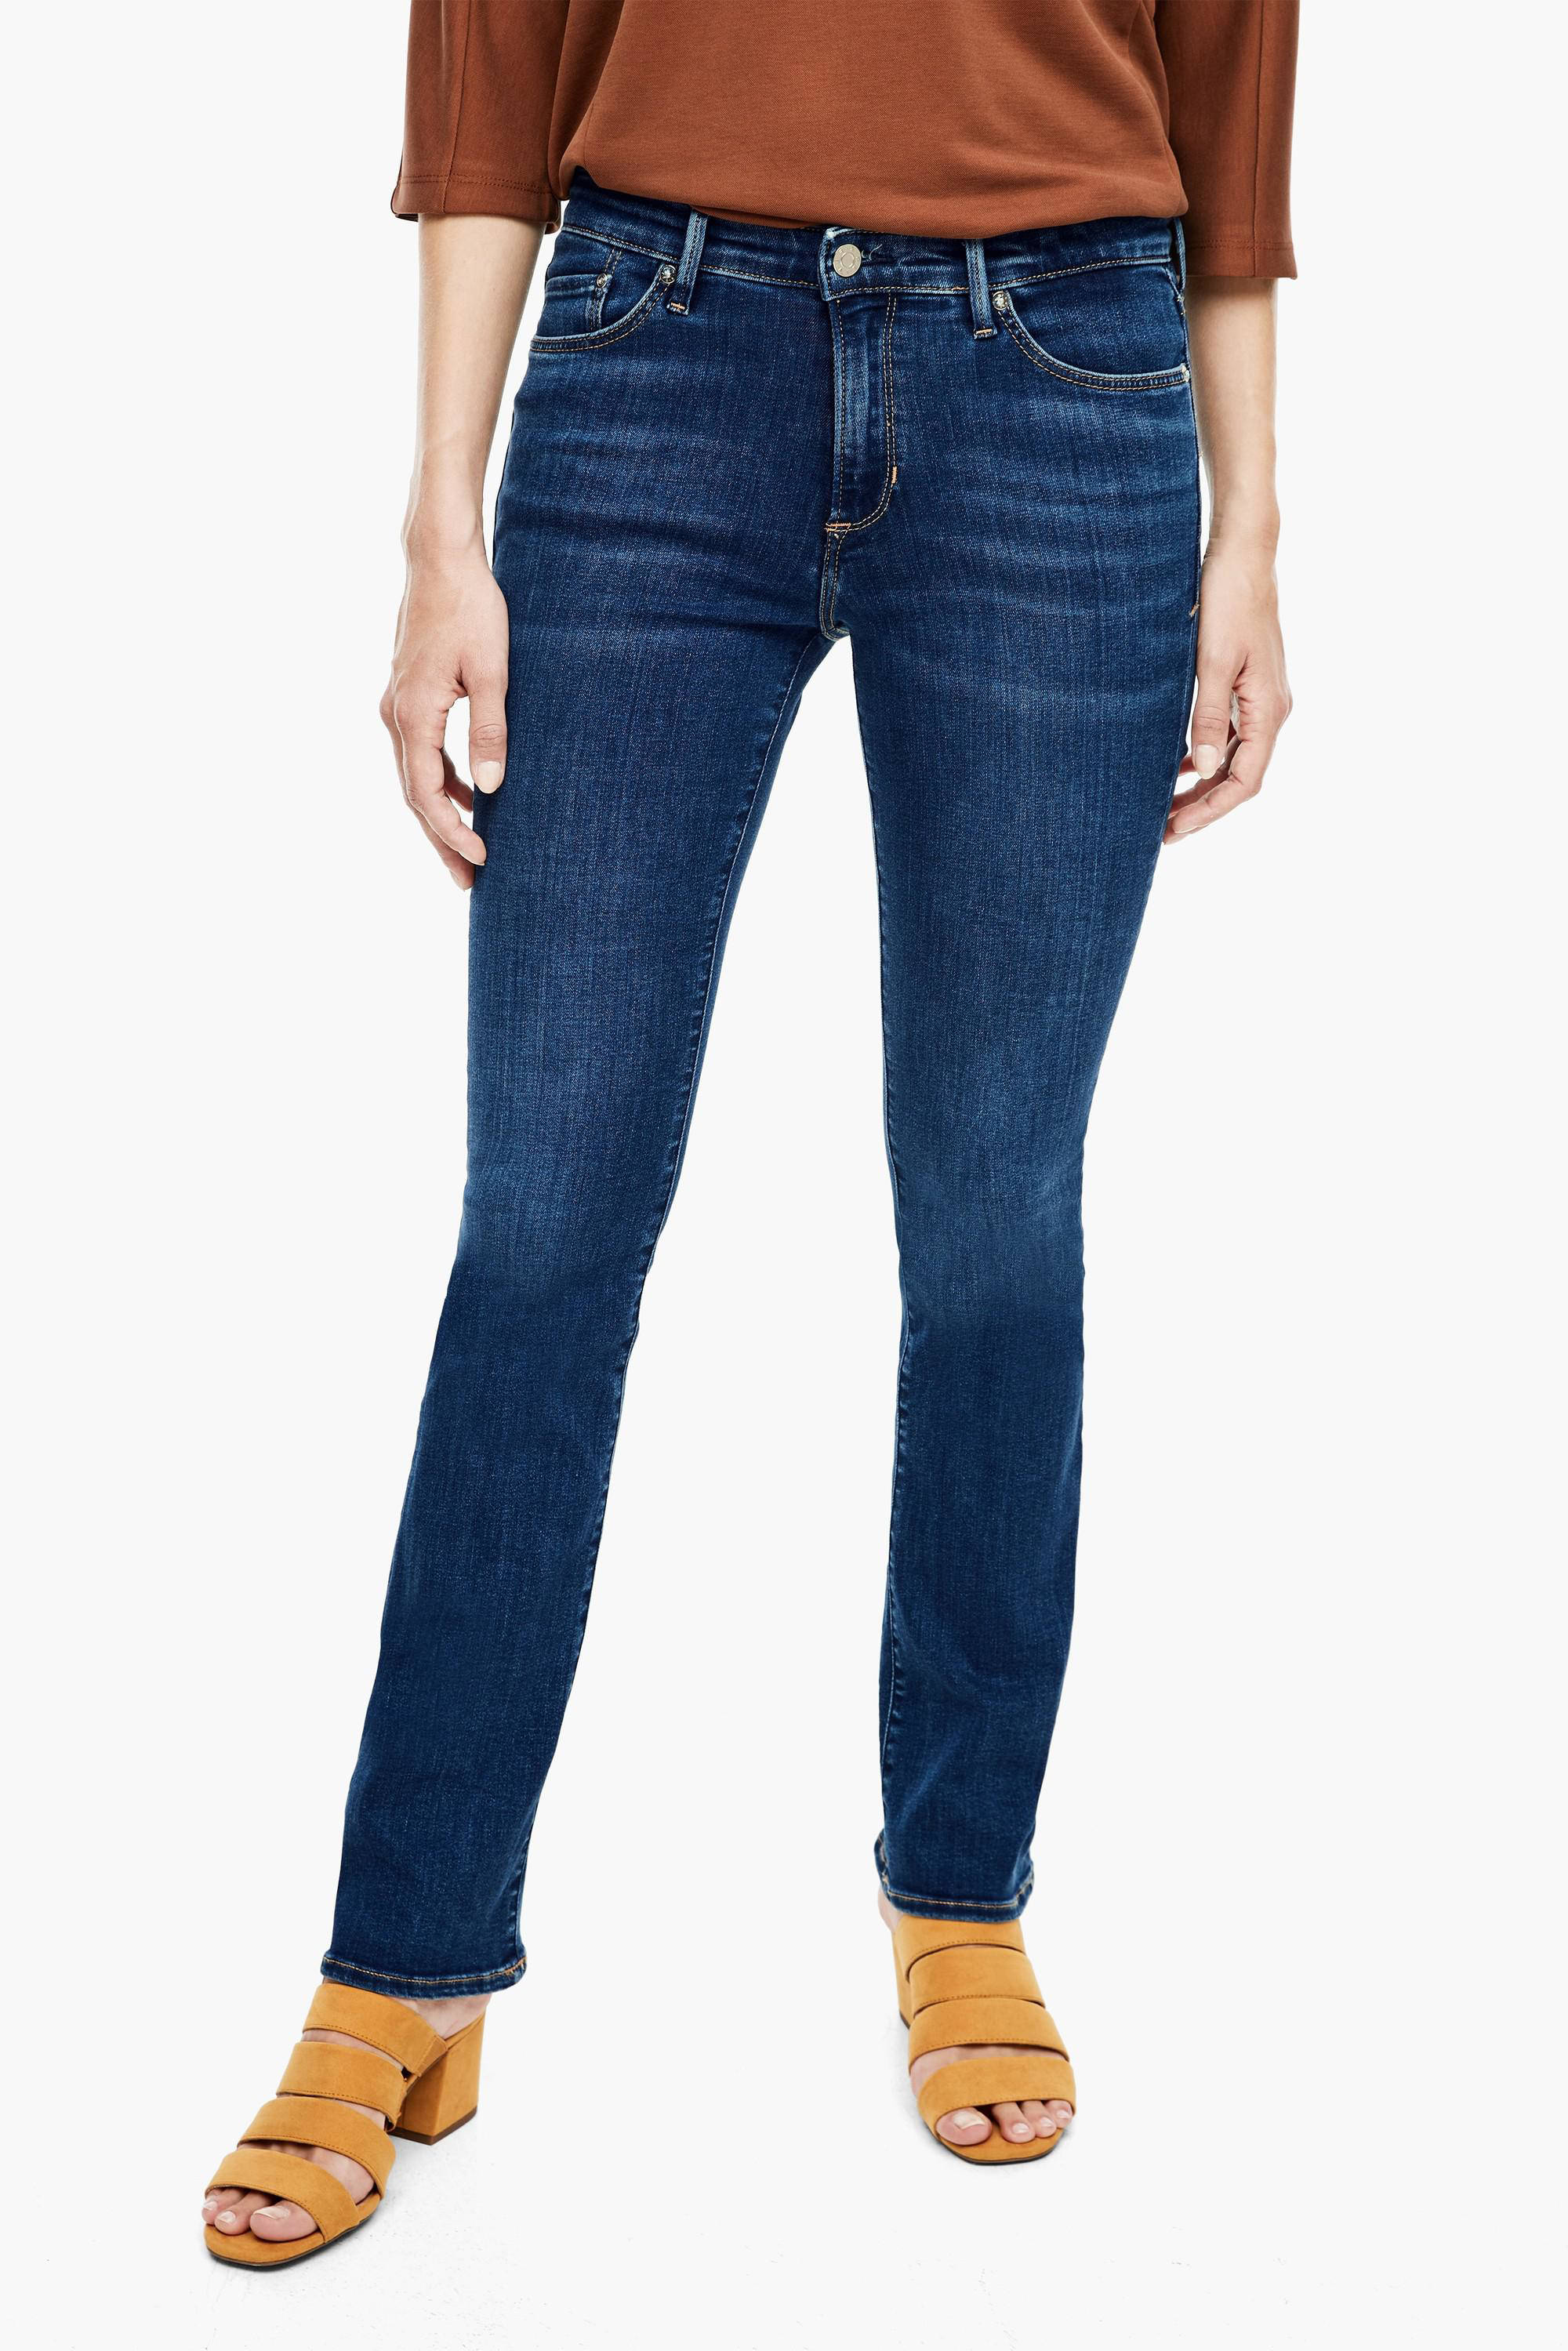 s oliver bootcut jeans